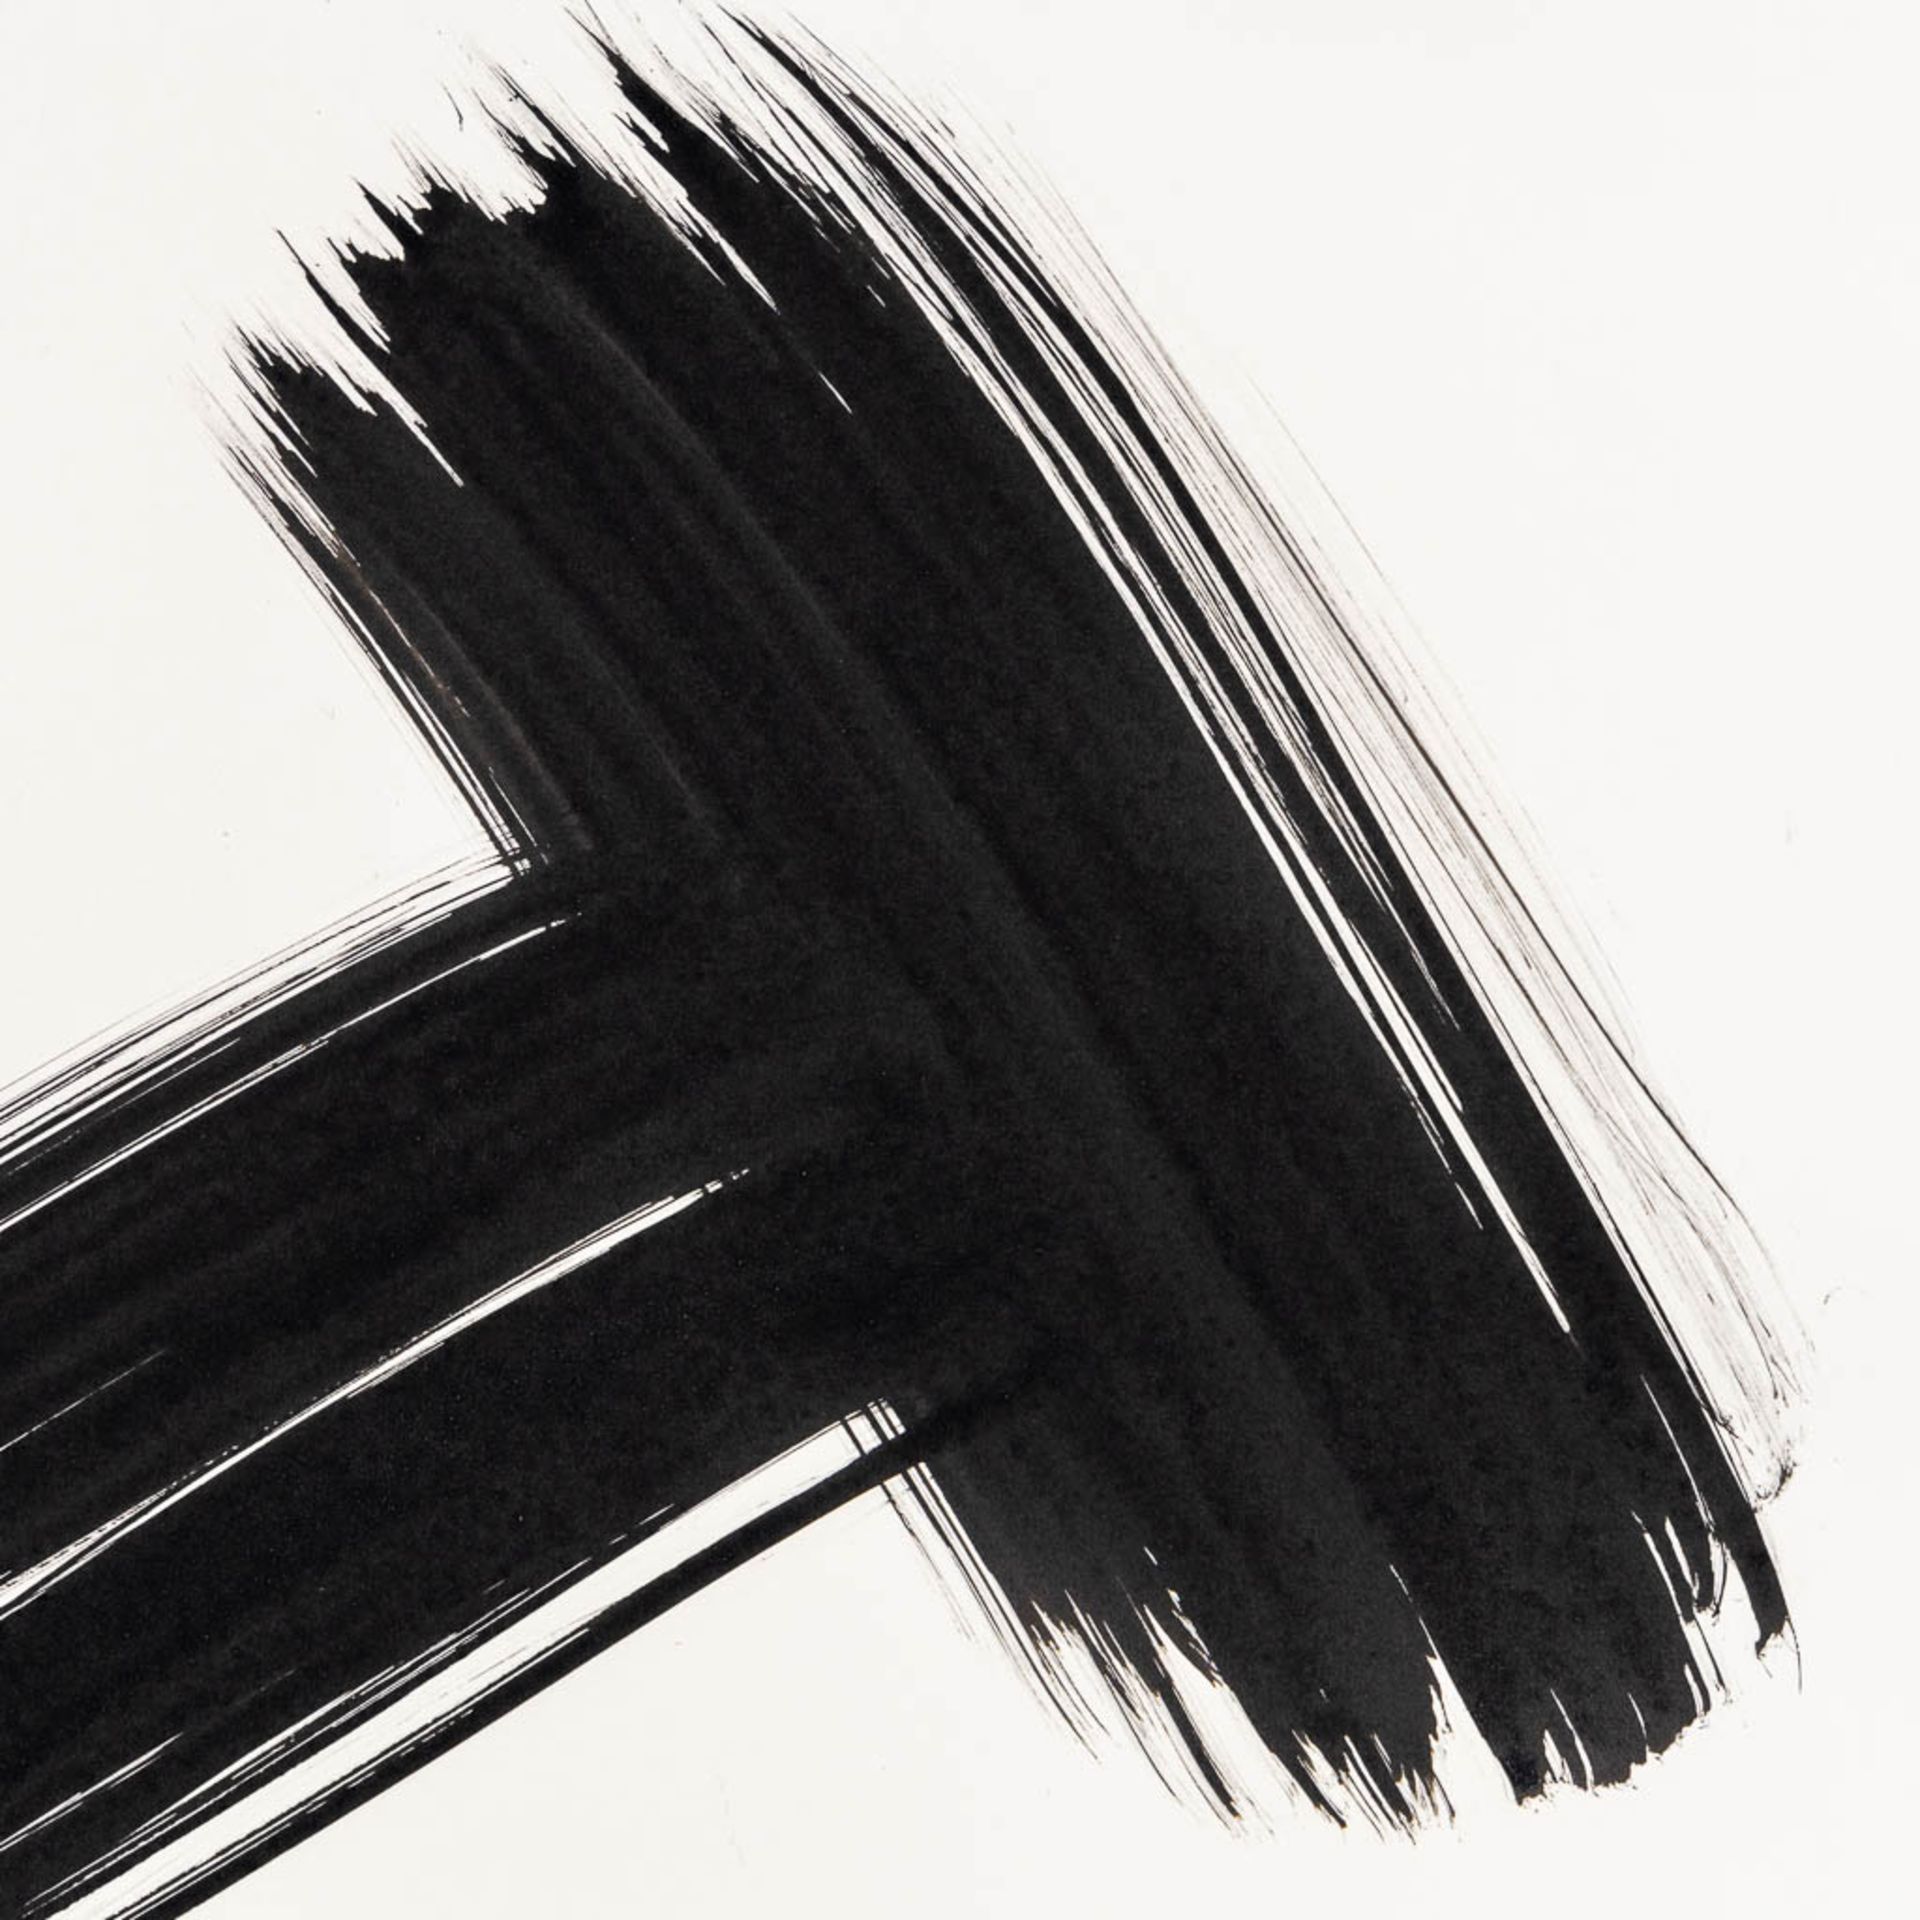 TSUKAI (XX) 'Calligraphy' eastern Indian ink on paper. (W:95 x H:64 cm) - Image 5 of 6